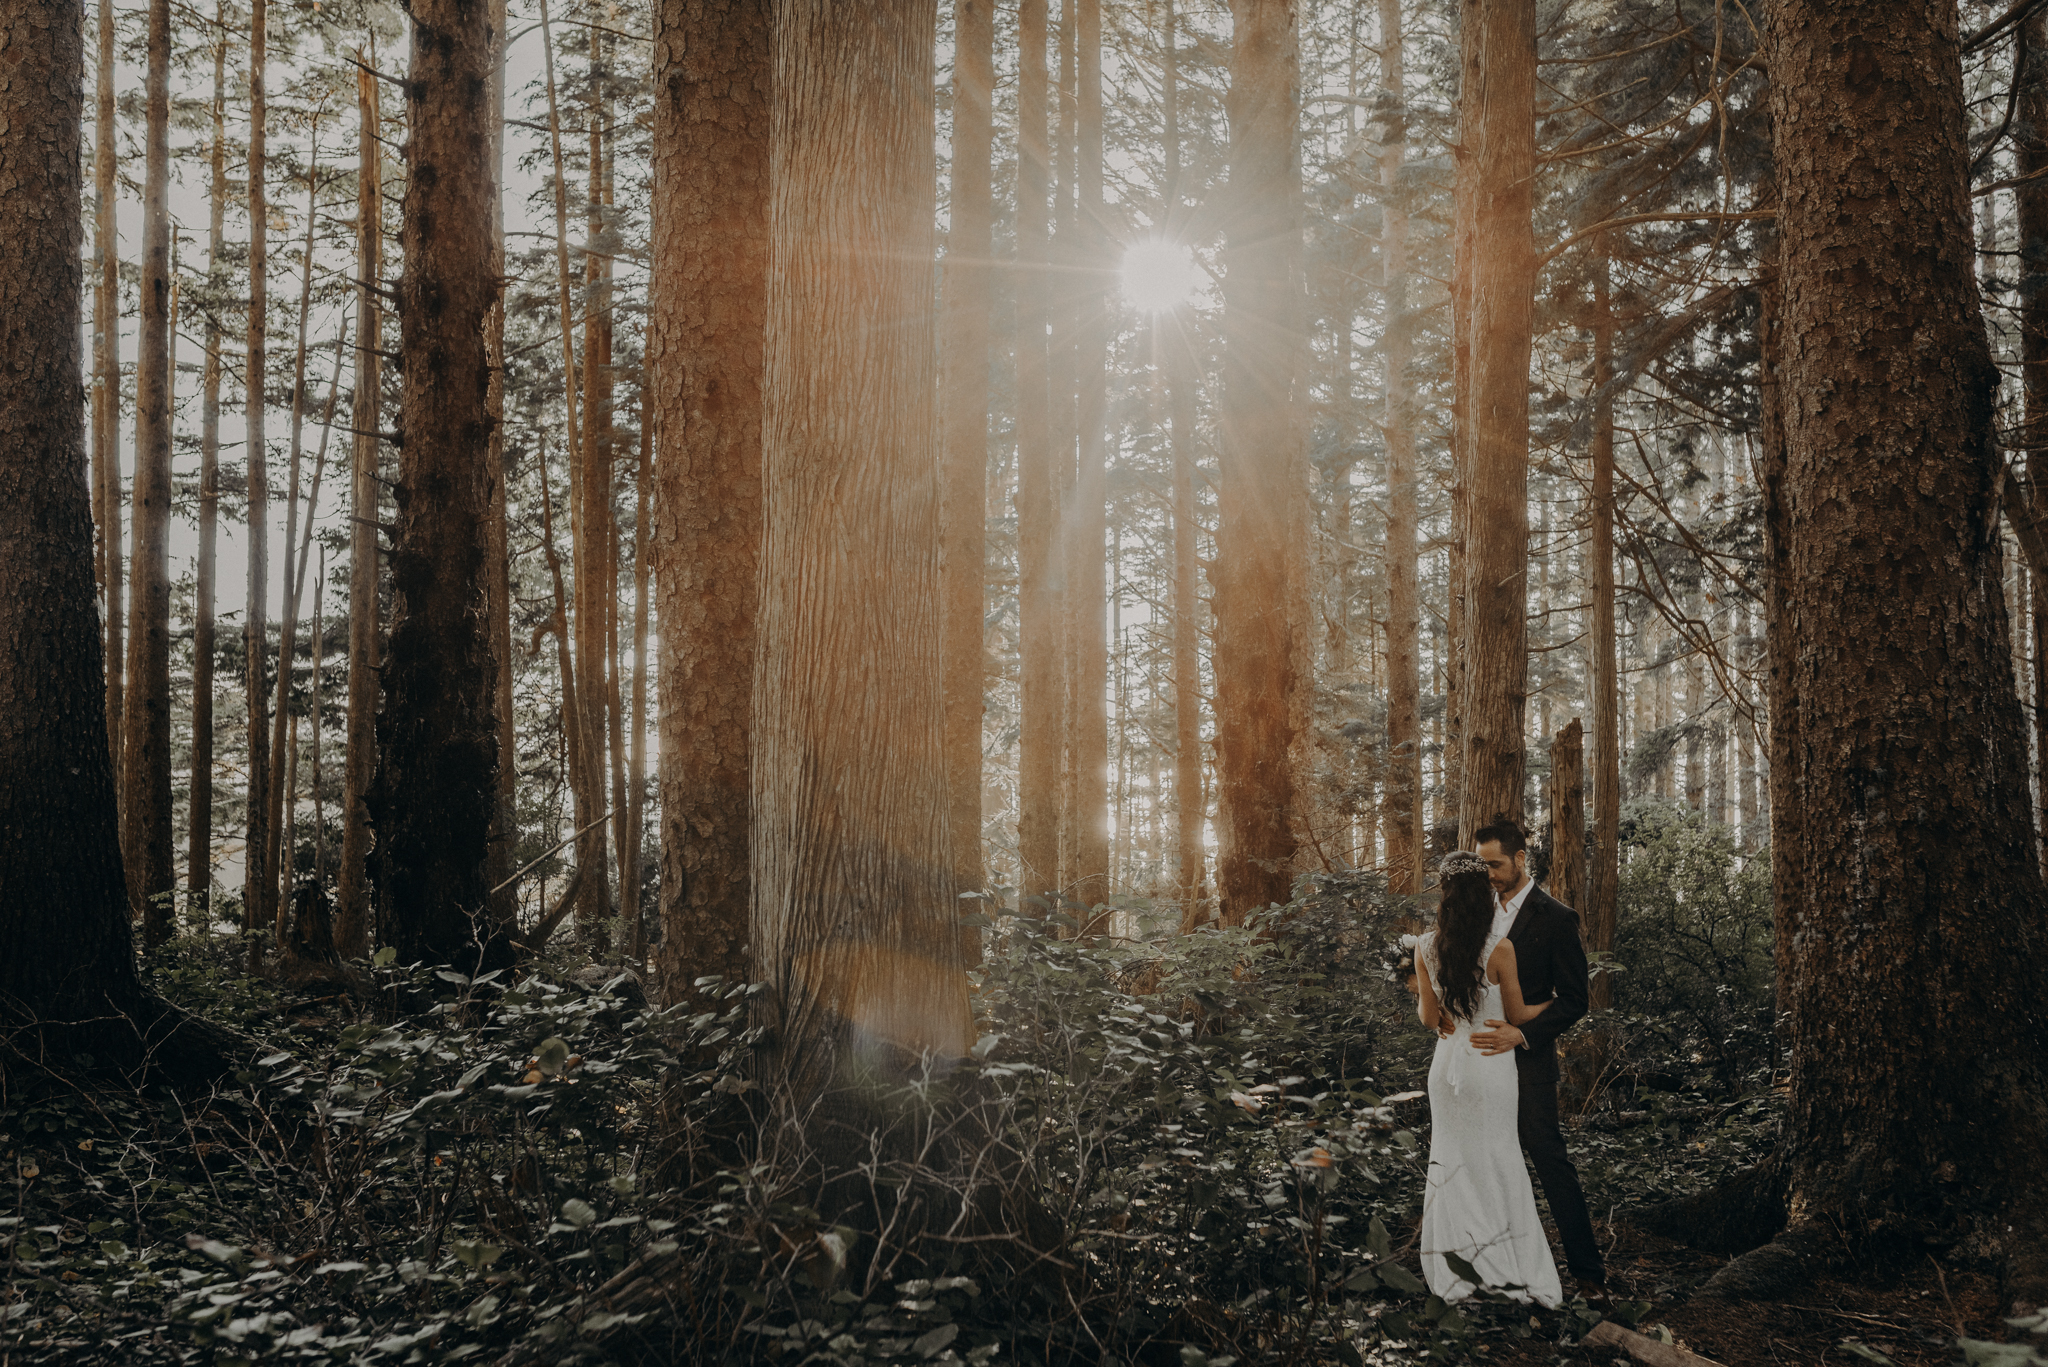 Isaiah + Taylor Photography - Cape Flattery Elopement, Olympia National Forest Wedding Photographer-094.jpg